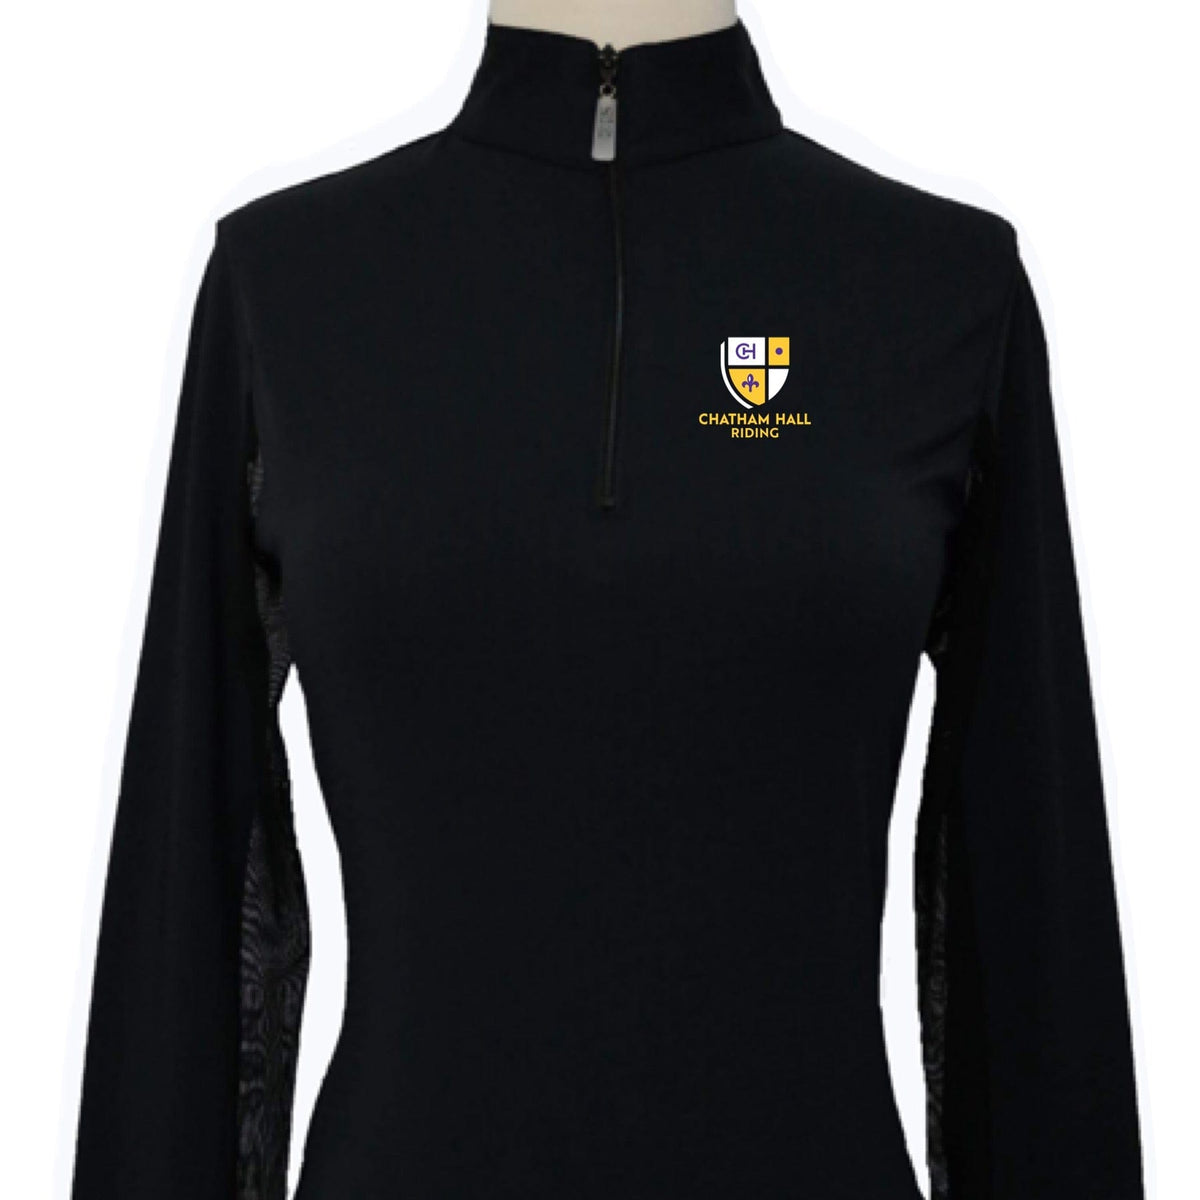 Equestrian Team Apparel Chatham Hall Riding Sun shirts equestrian team apparel online tack store mobile tack store custom farm apparel custom show stable clothing equestrian lifestyle horse show clothing riding clothes horses equestrian tack store